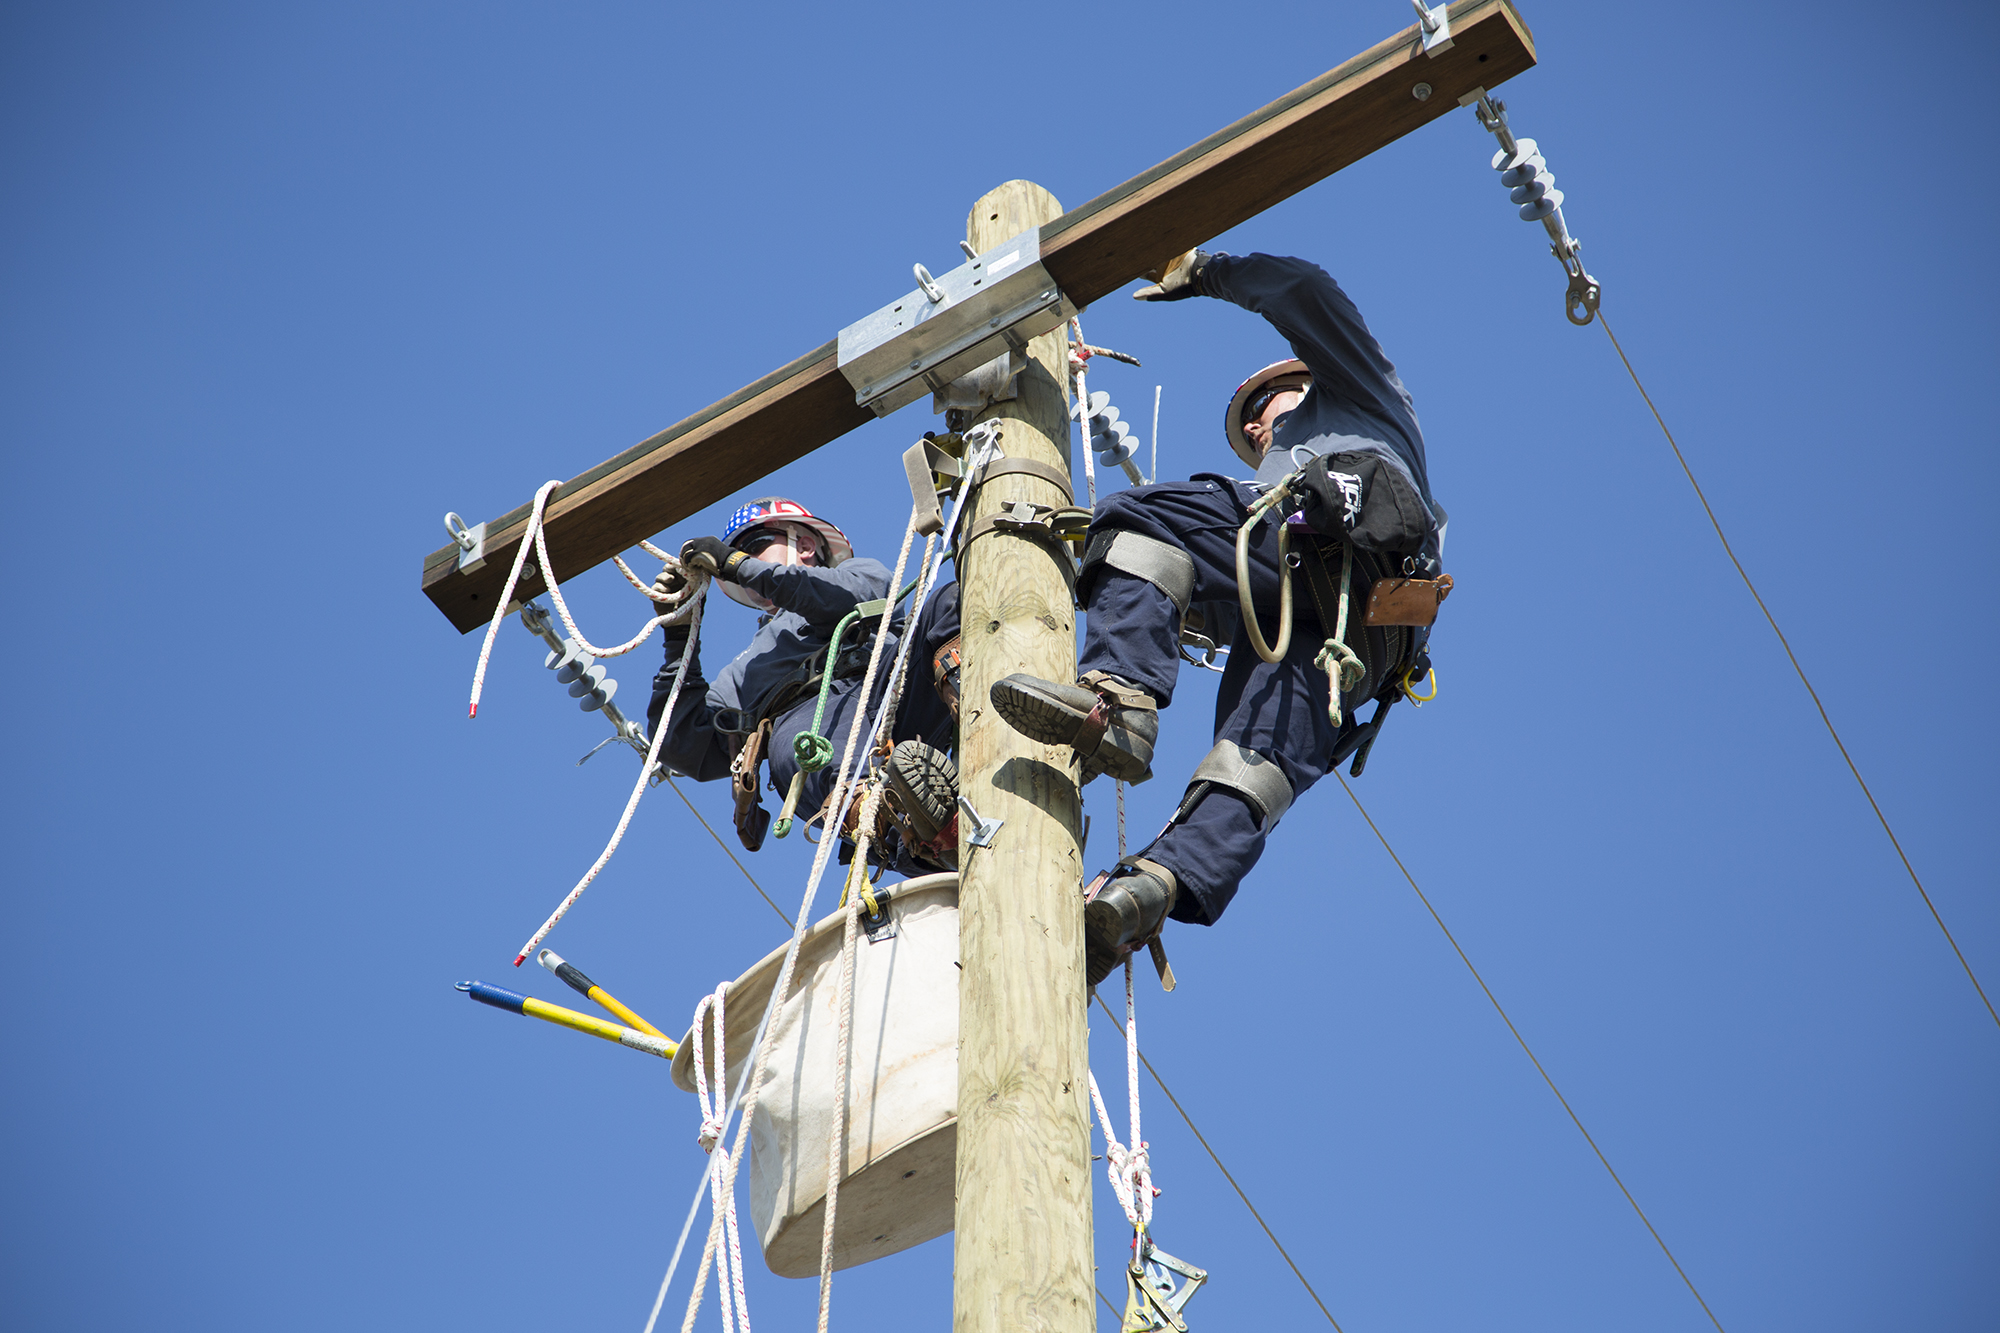 Family, Fraternity at Lineman’s Rodeo America's Electric Cooperatives